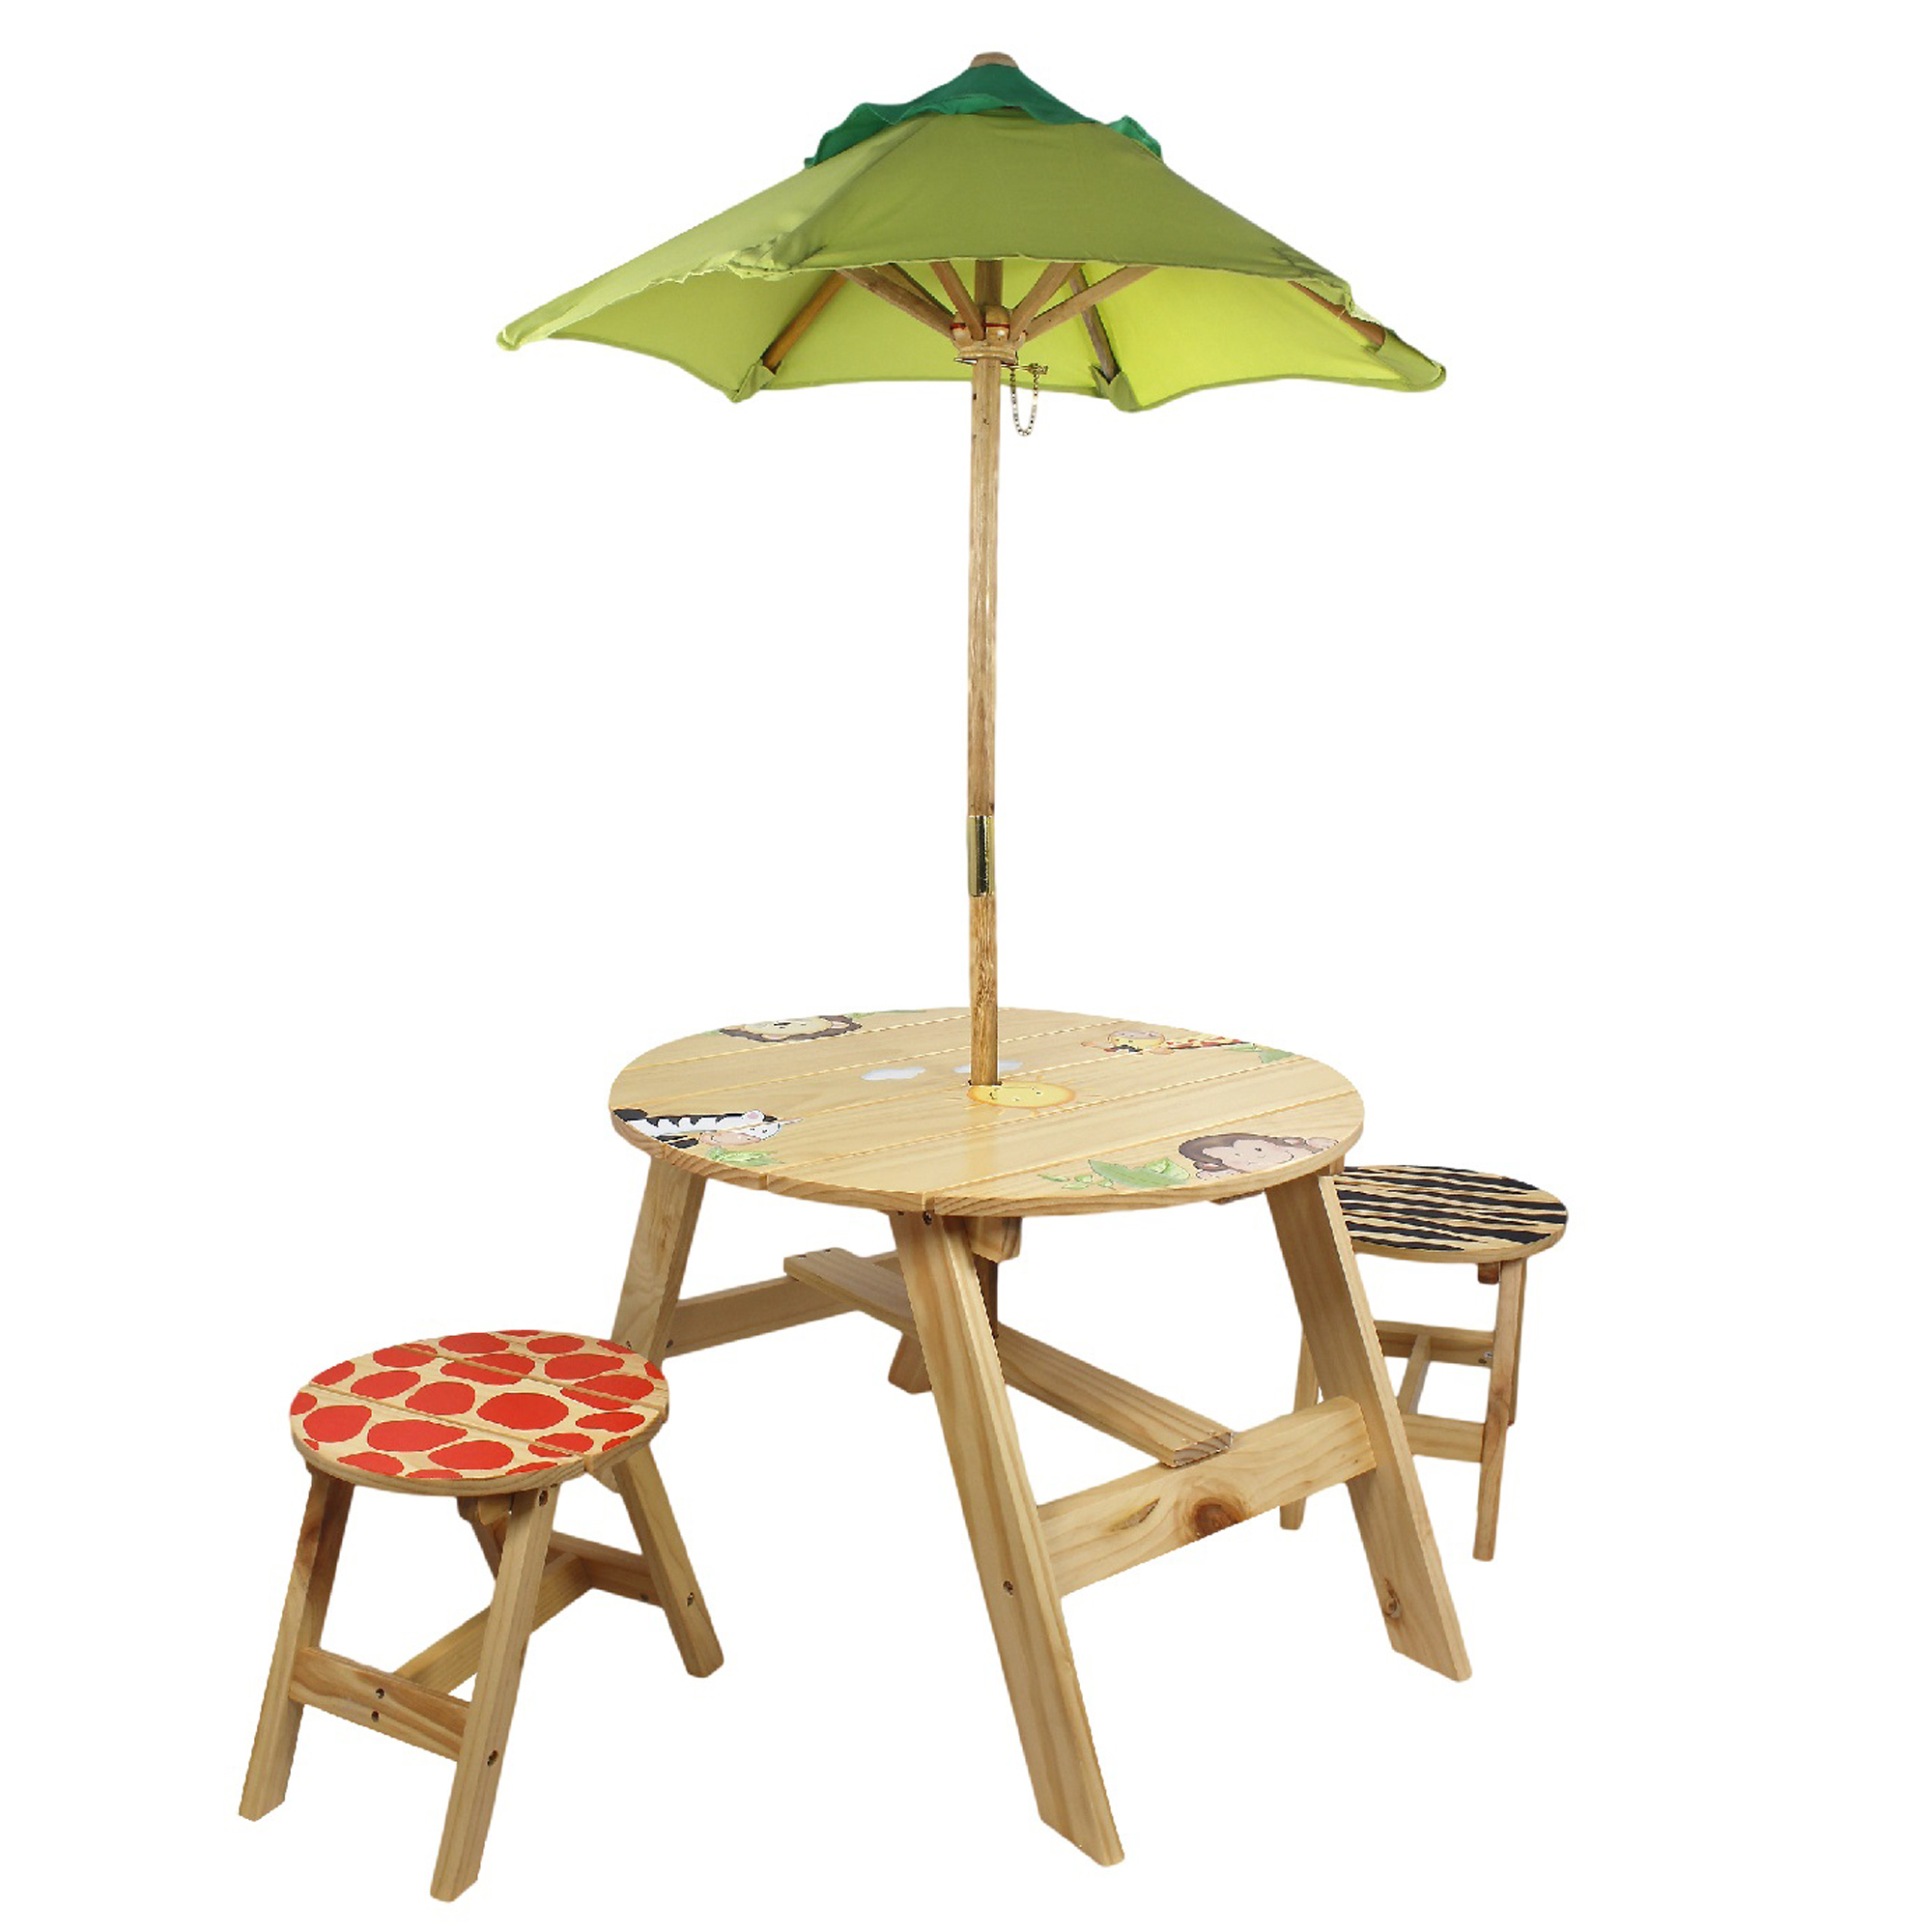 Fantasy Fields Children Kids Toddler Wooden Table and Chair Set Outdoor TD-0030A - image 1 of 6